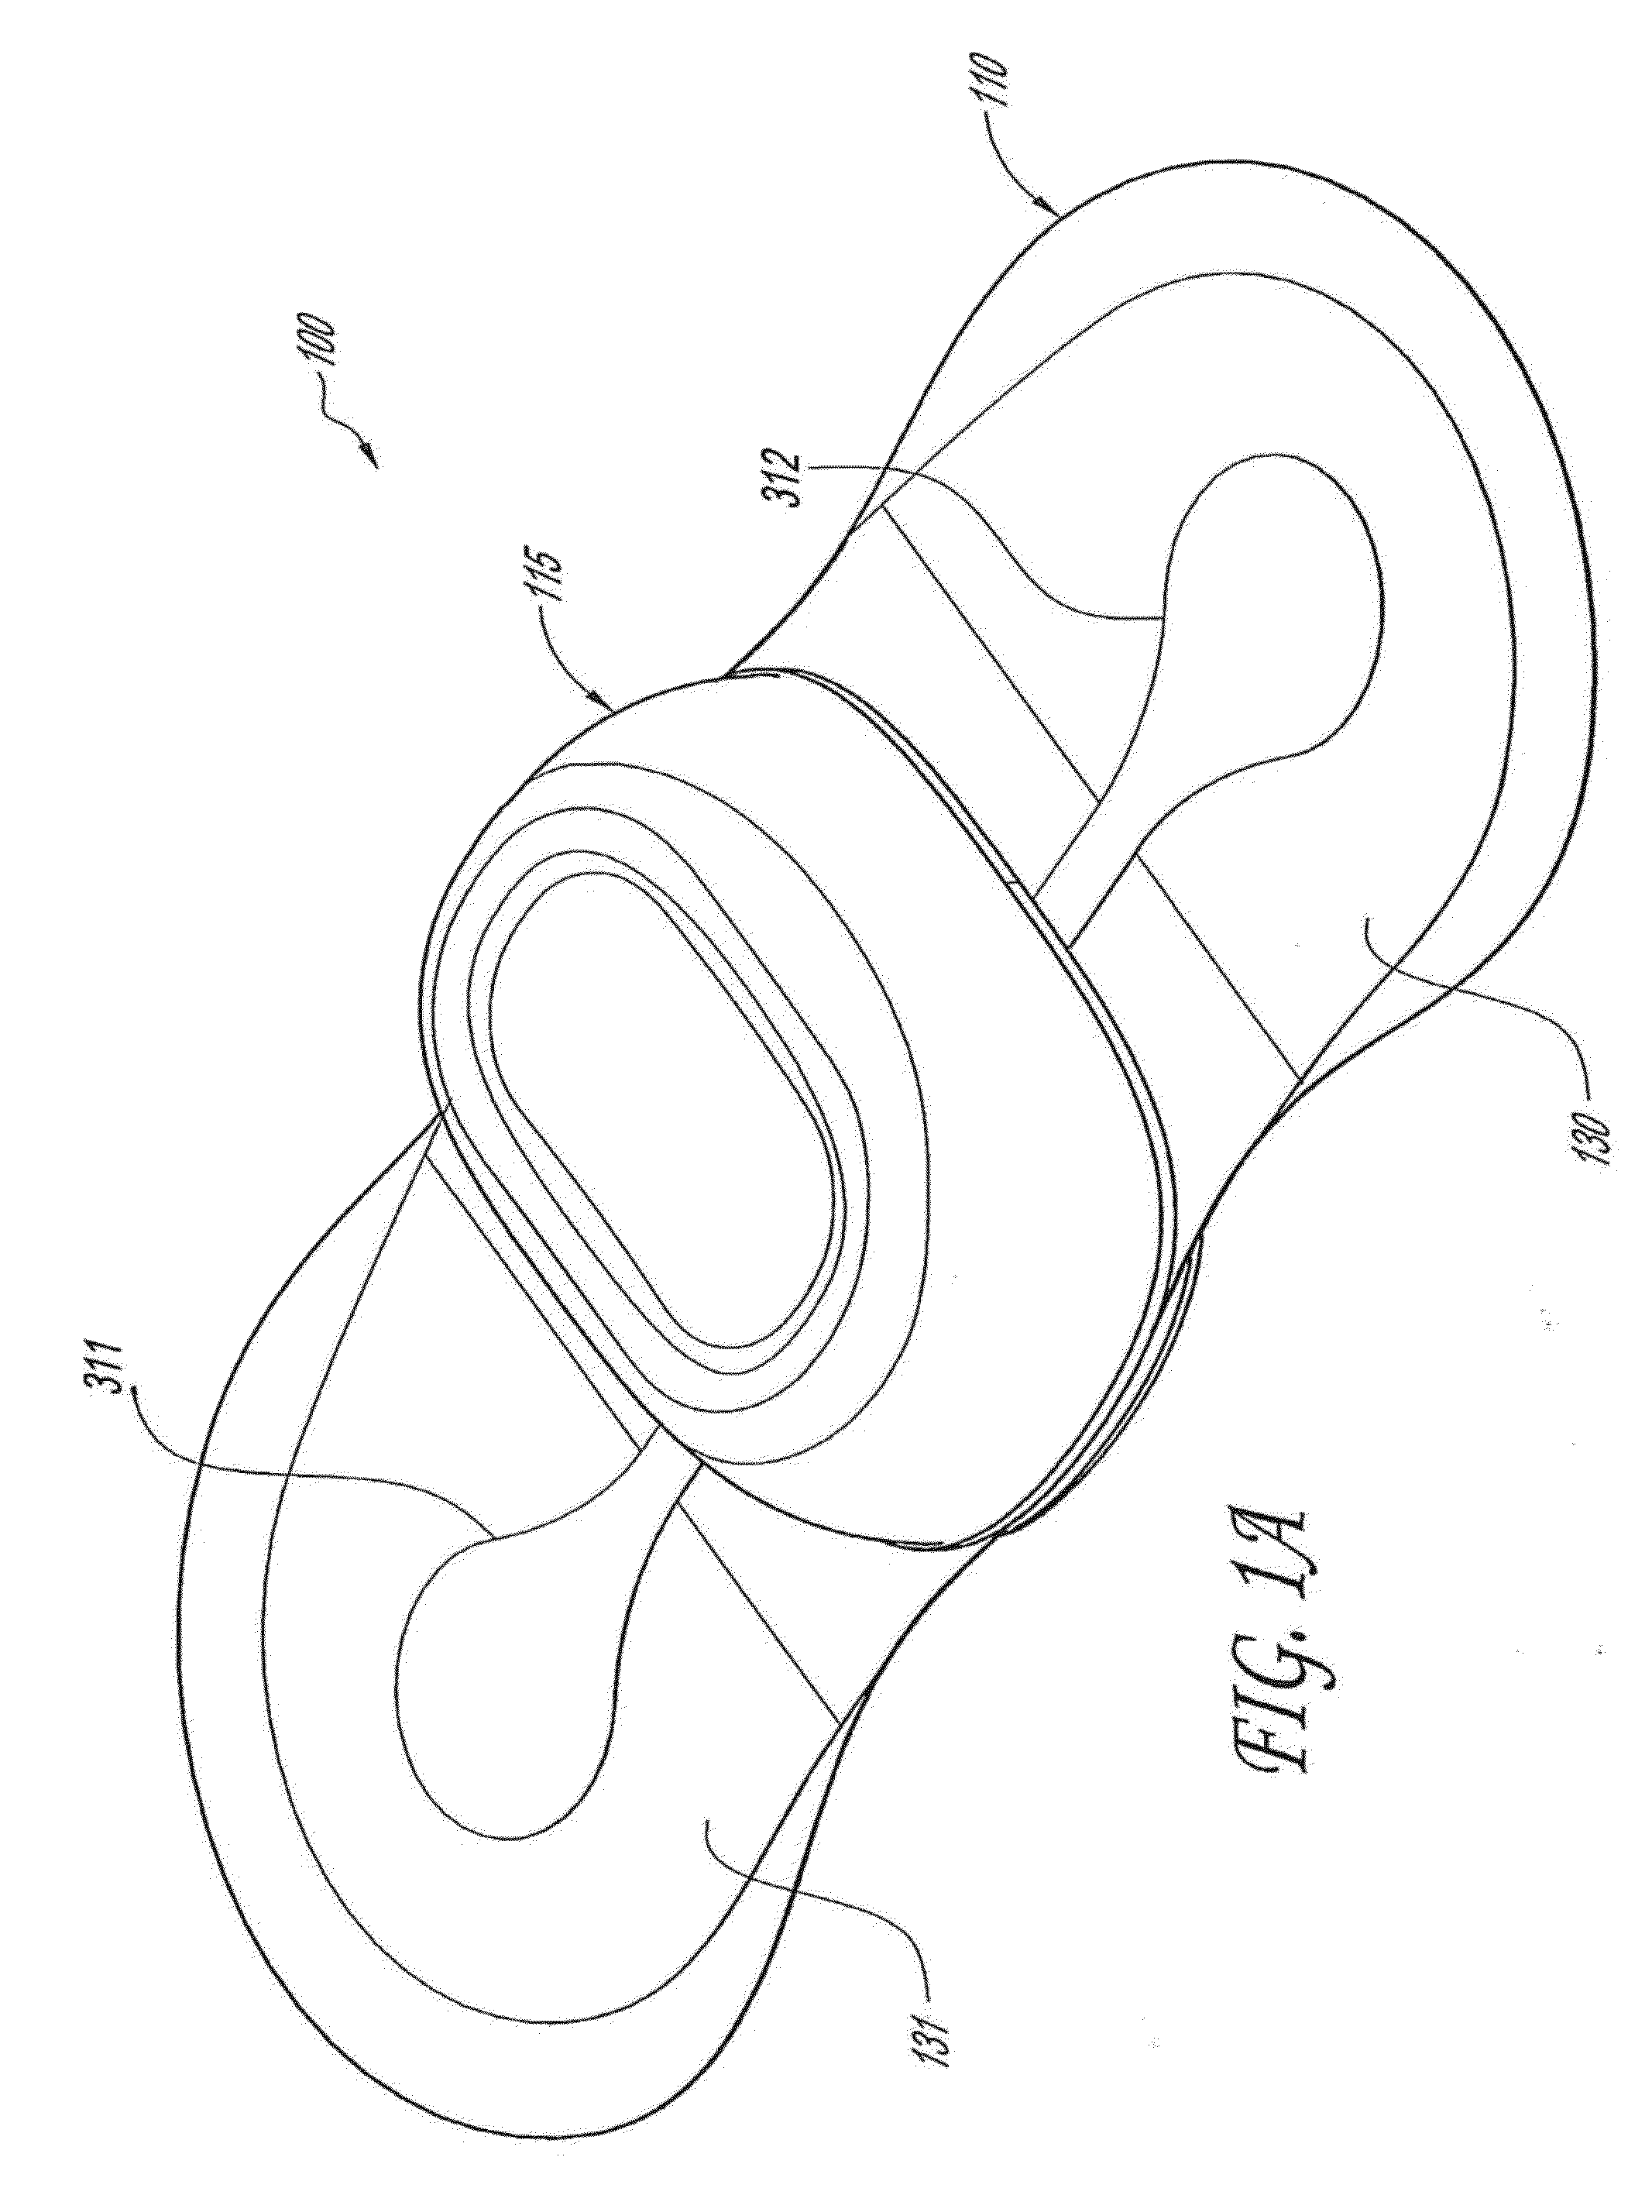 Physiological monitoring device